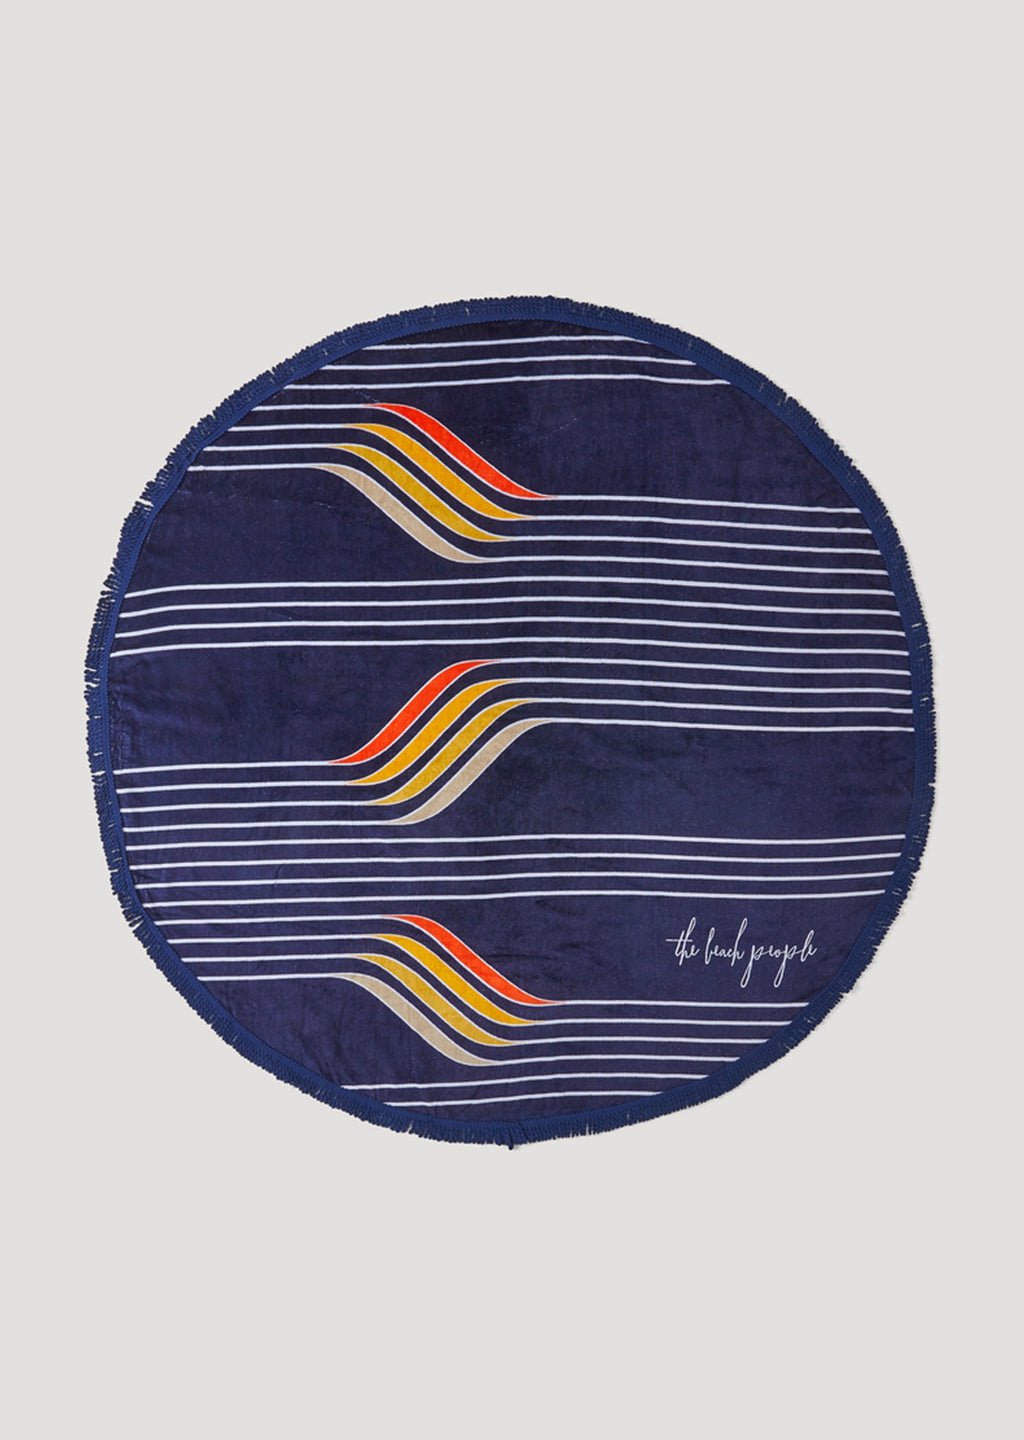 Starboard Round Towel - The Beach People 